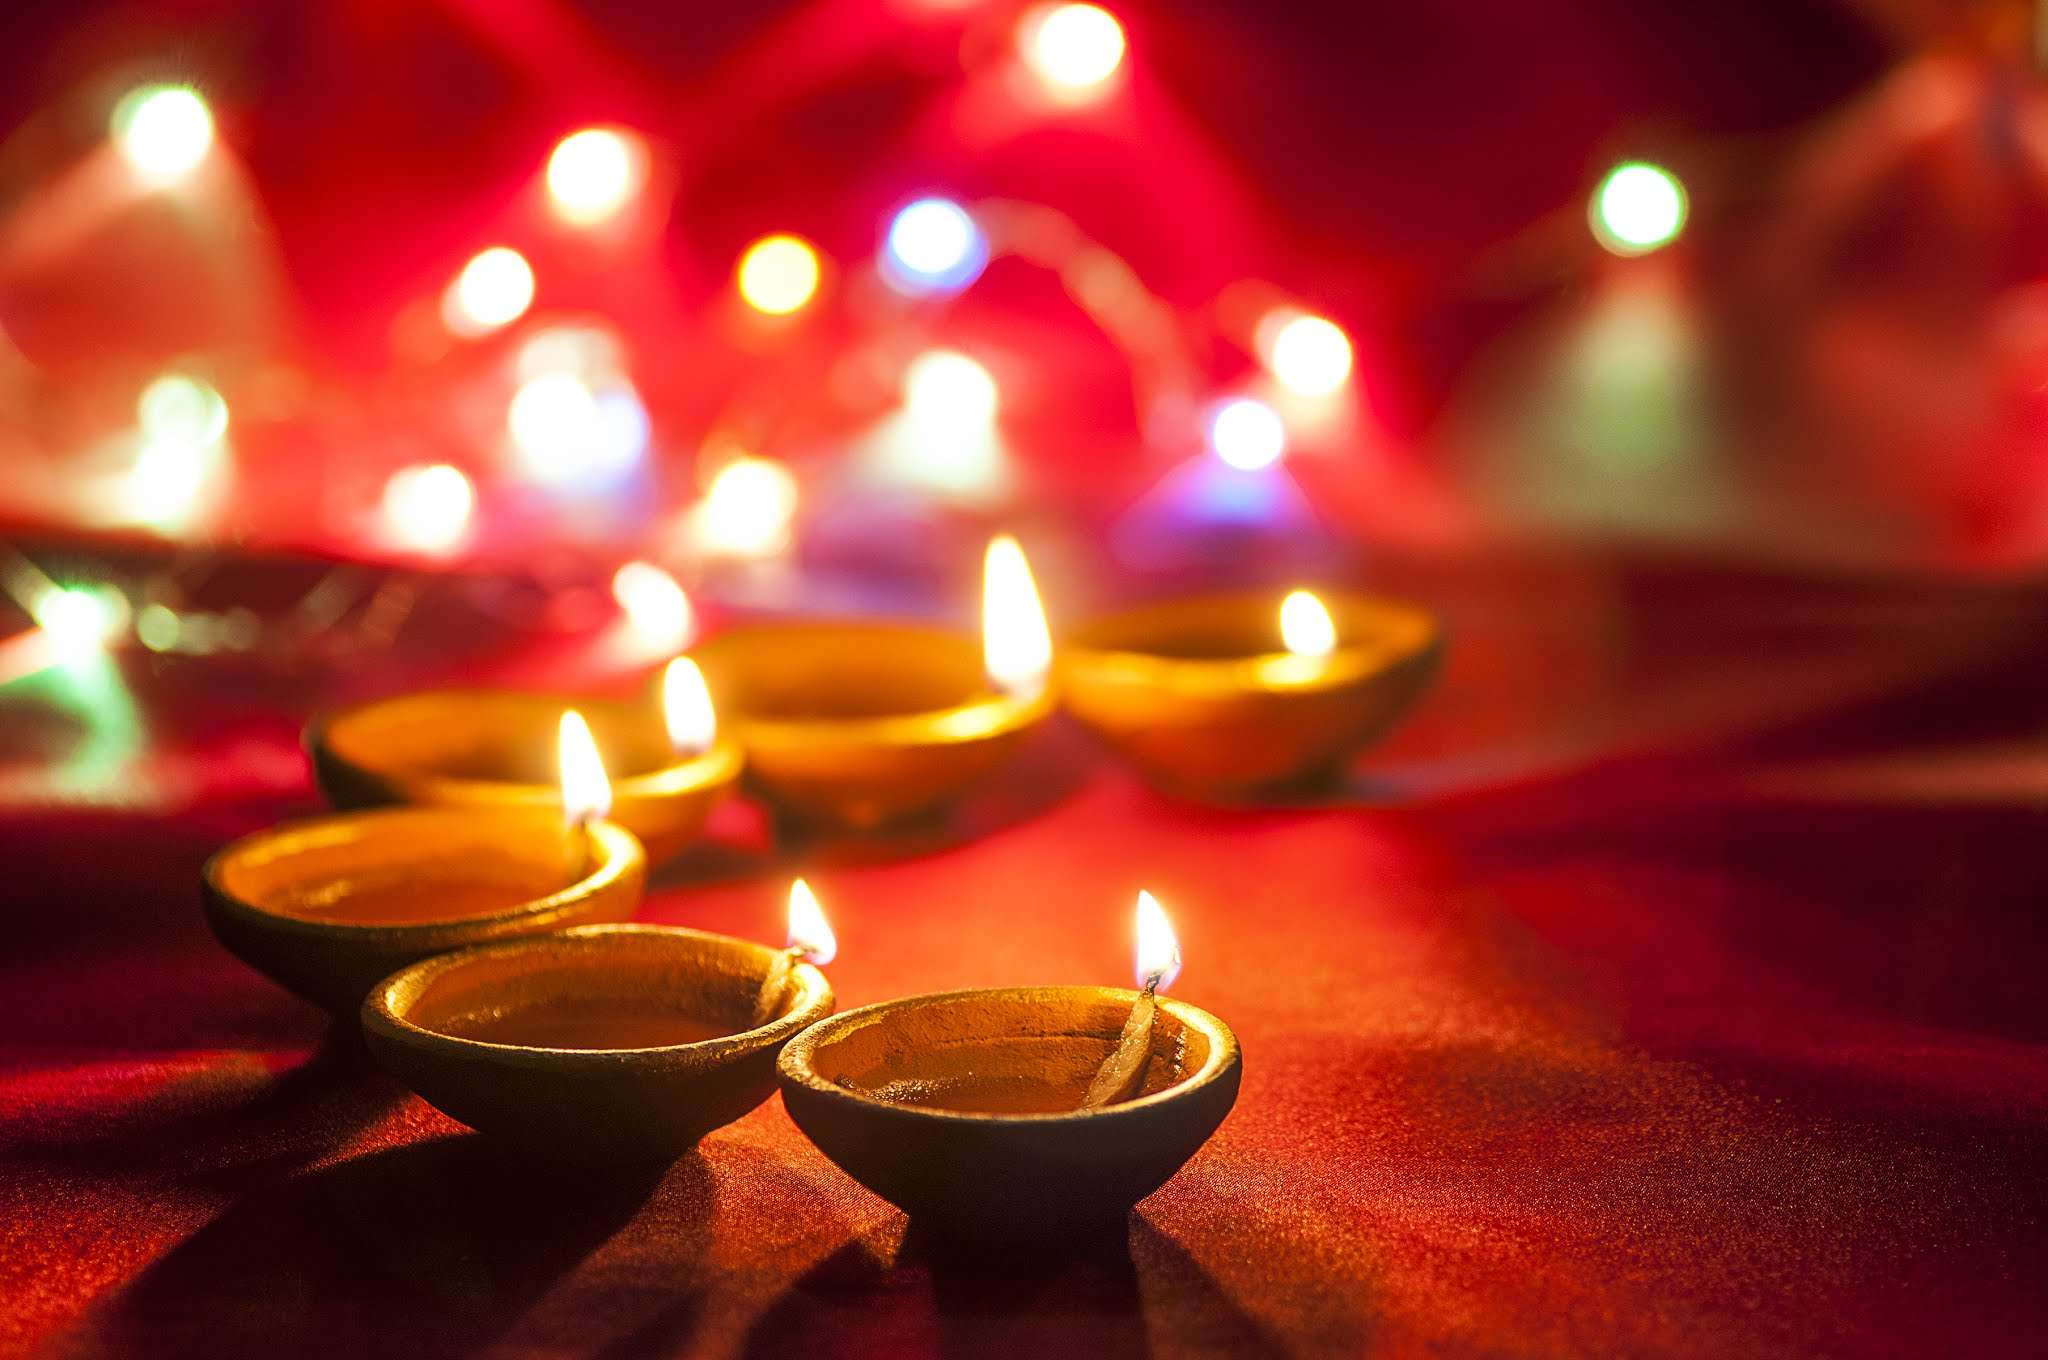 Happy Diwali 2020: WhatsApp messages, wishes, image, Facebook messages, SMS, cards and greetings for Diwali of India